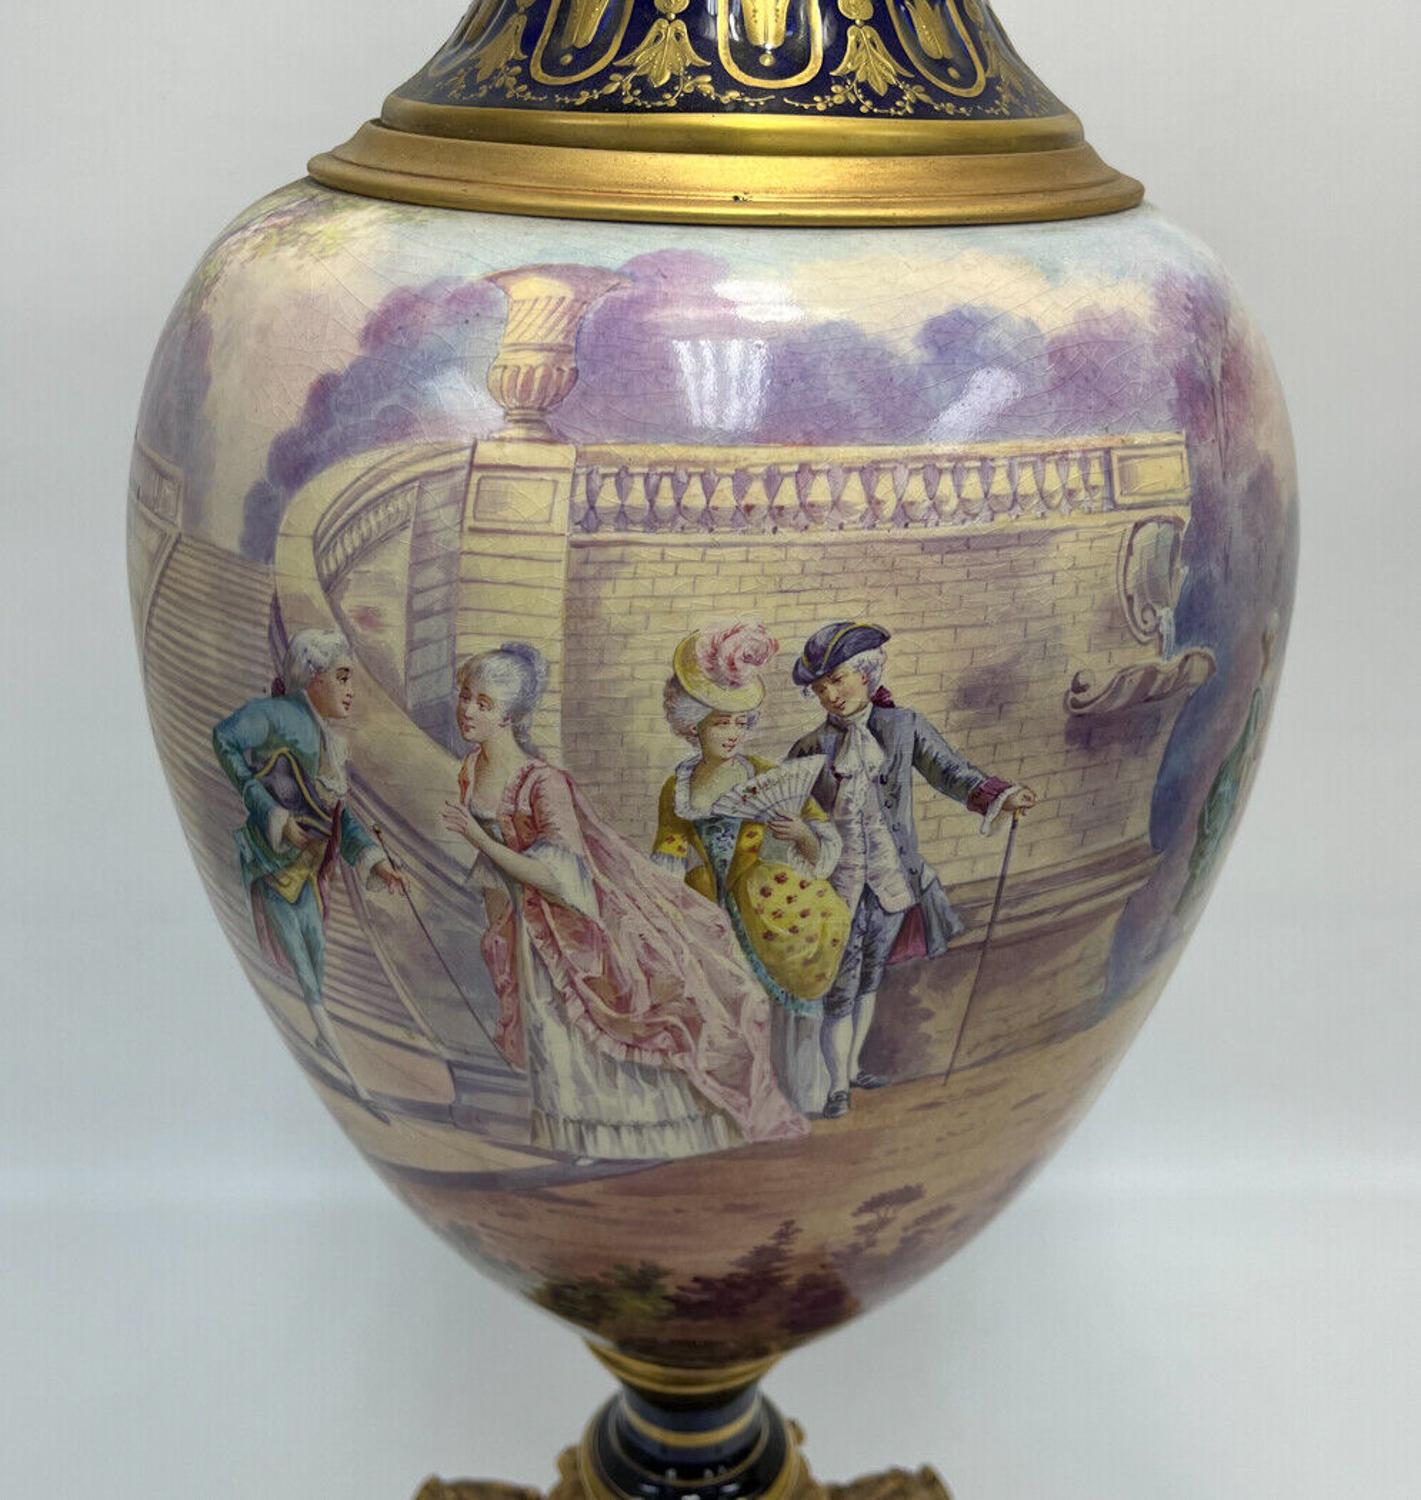 Sevres France porcelain large decorative urn, Late 19th Century. The central band depicting various period era court scenes. Artist signed 